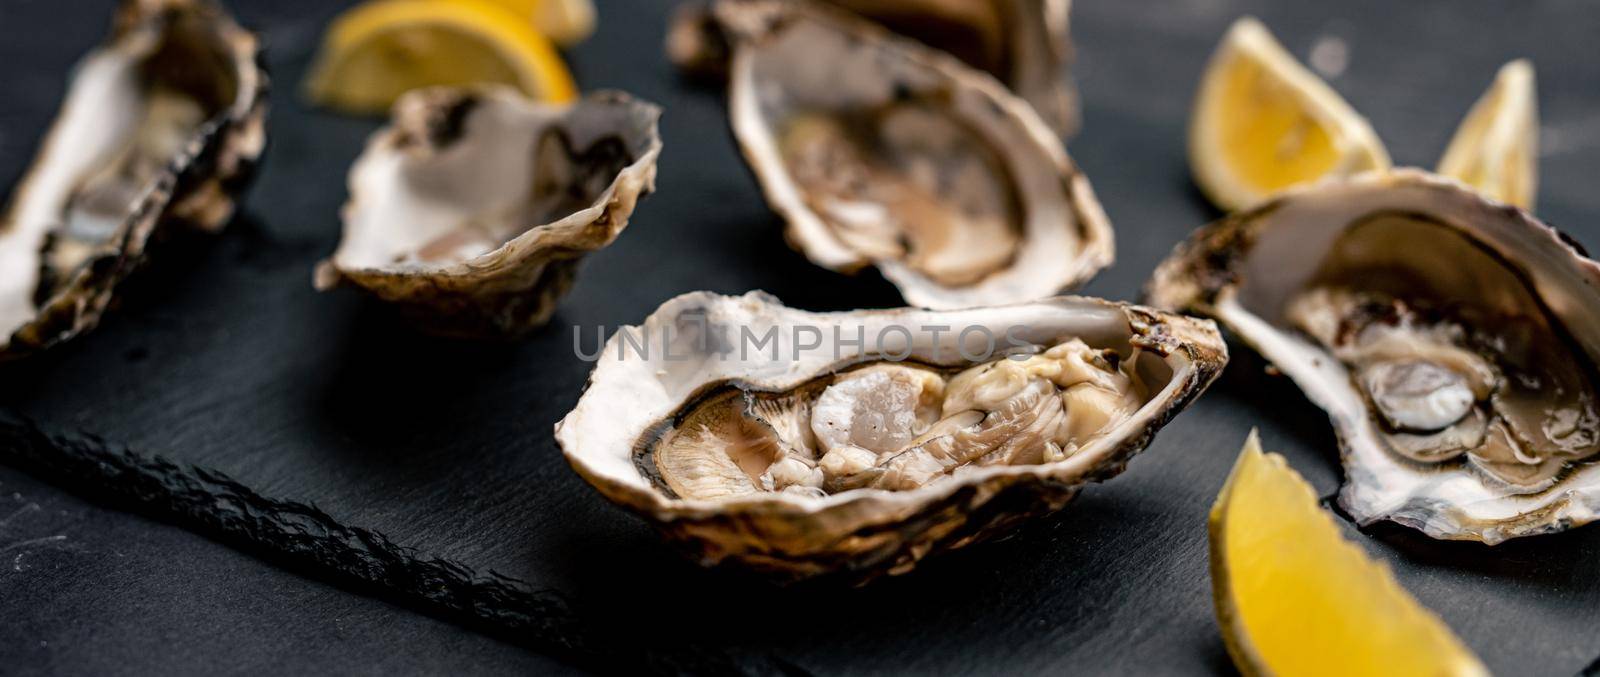 Fresh raw opened oysters served with lemon on balck platter. Seafood delicatessen